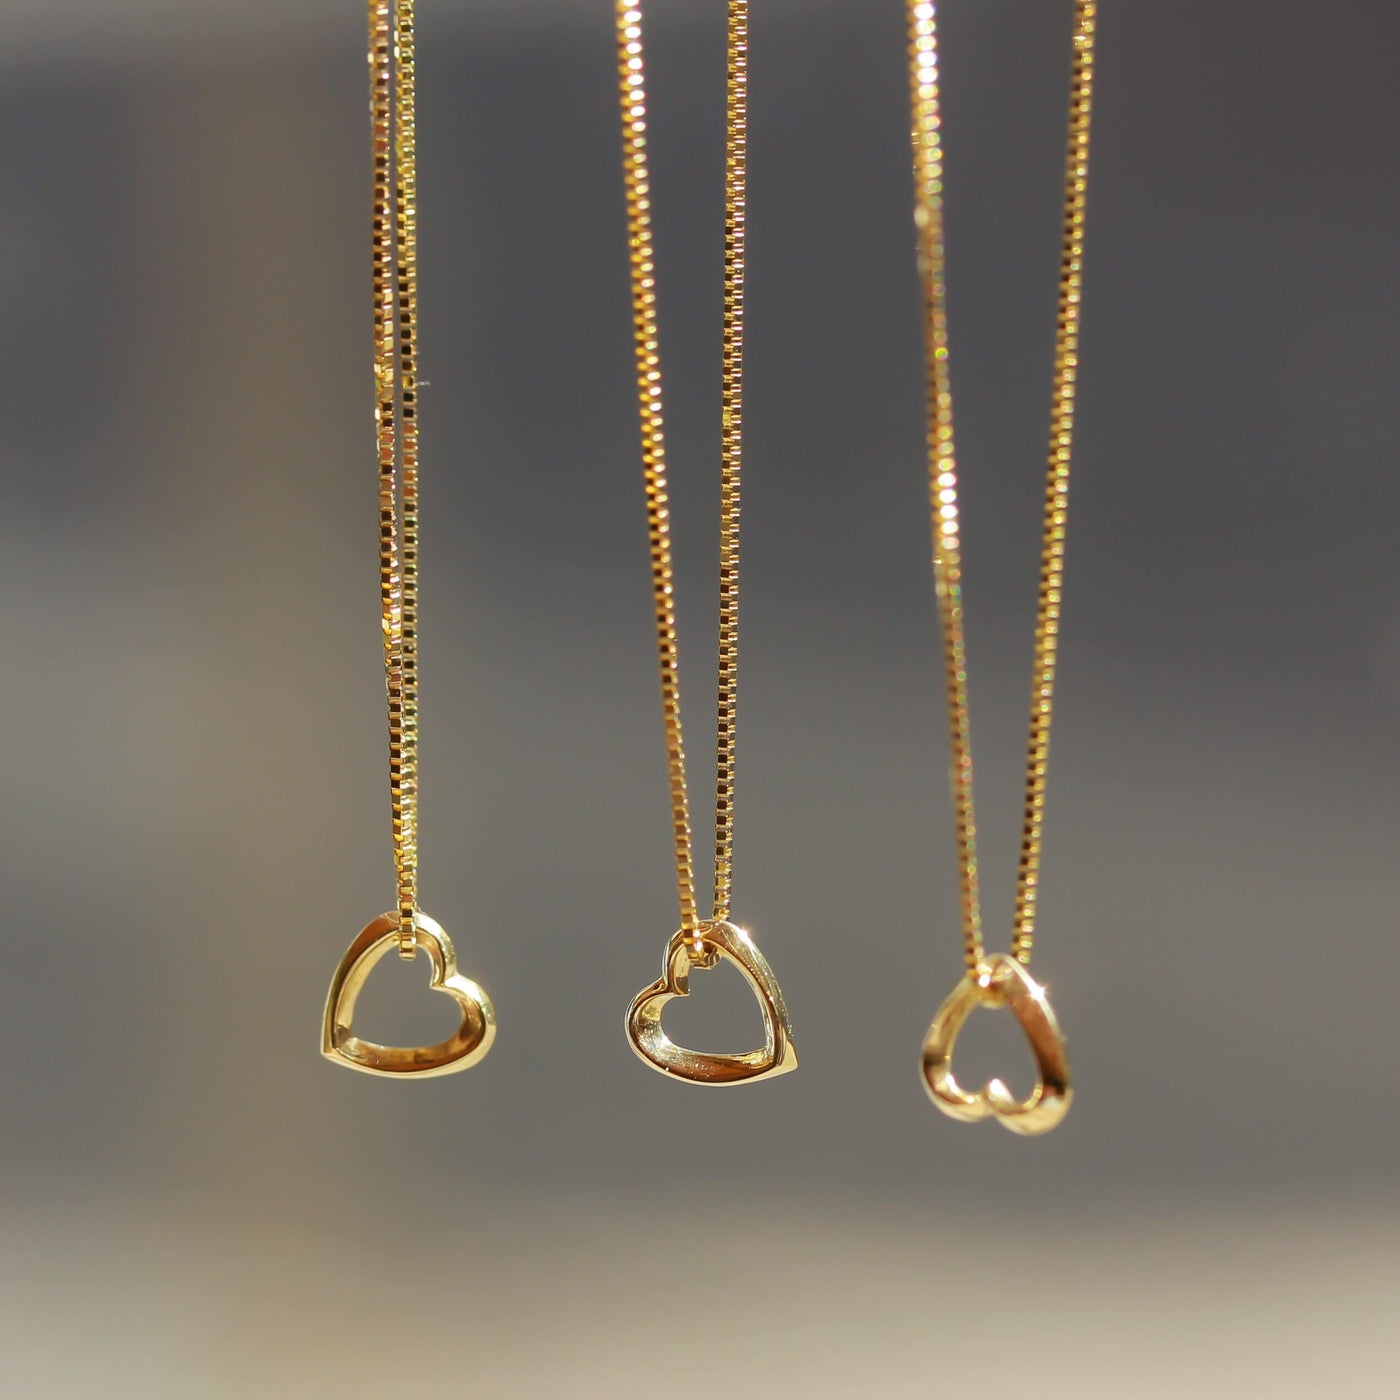 New Heart Necklace 14K Gold Necklaces 